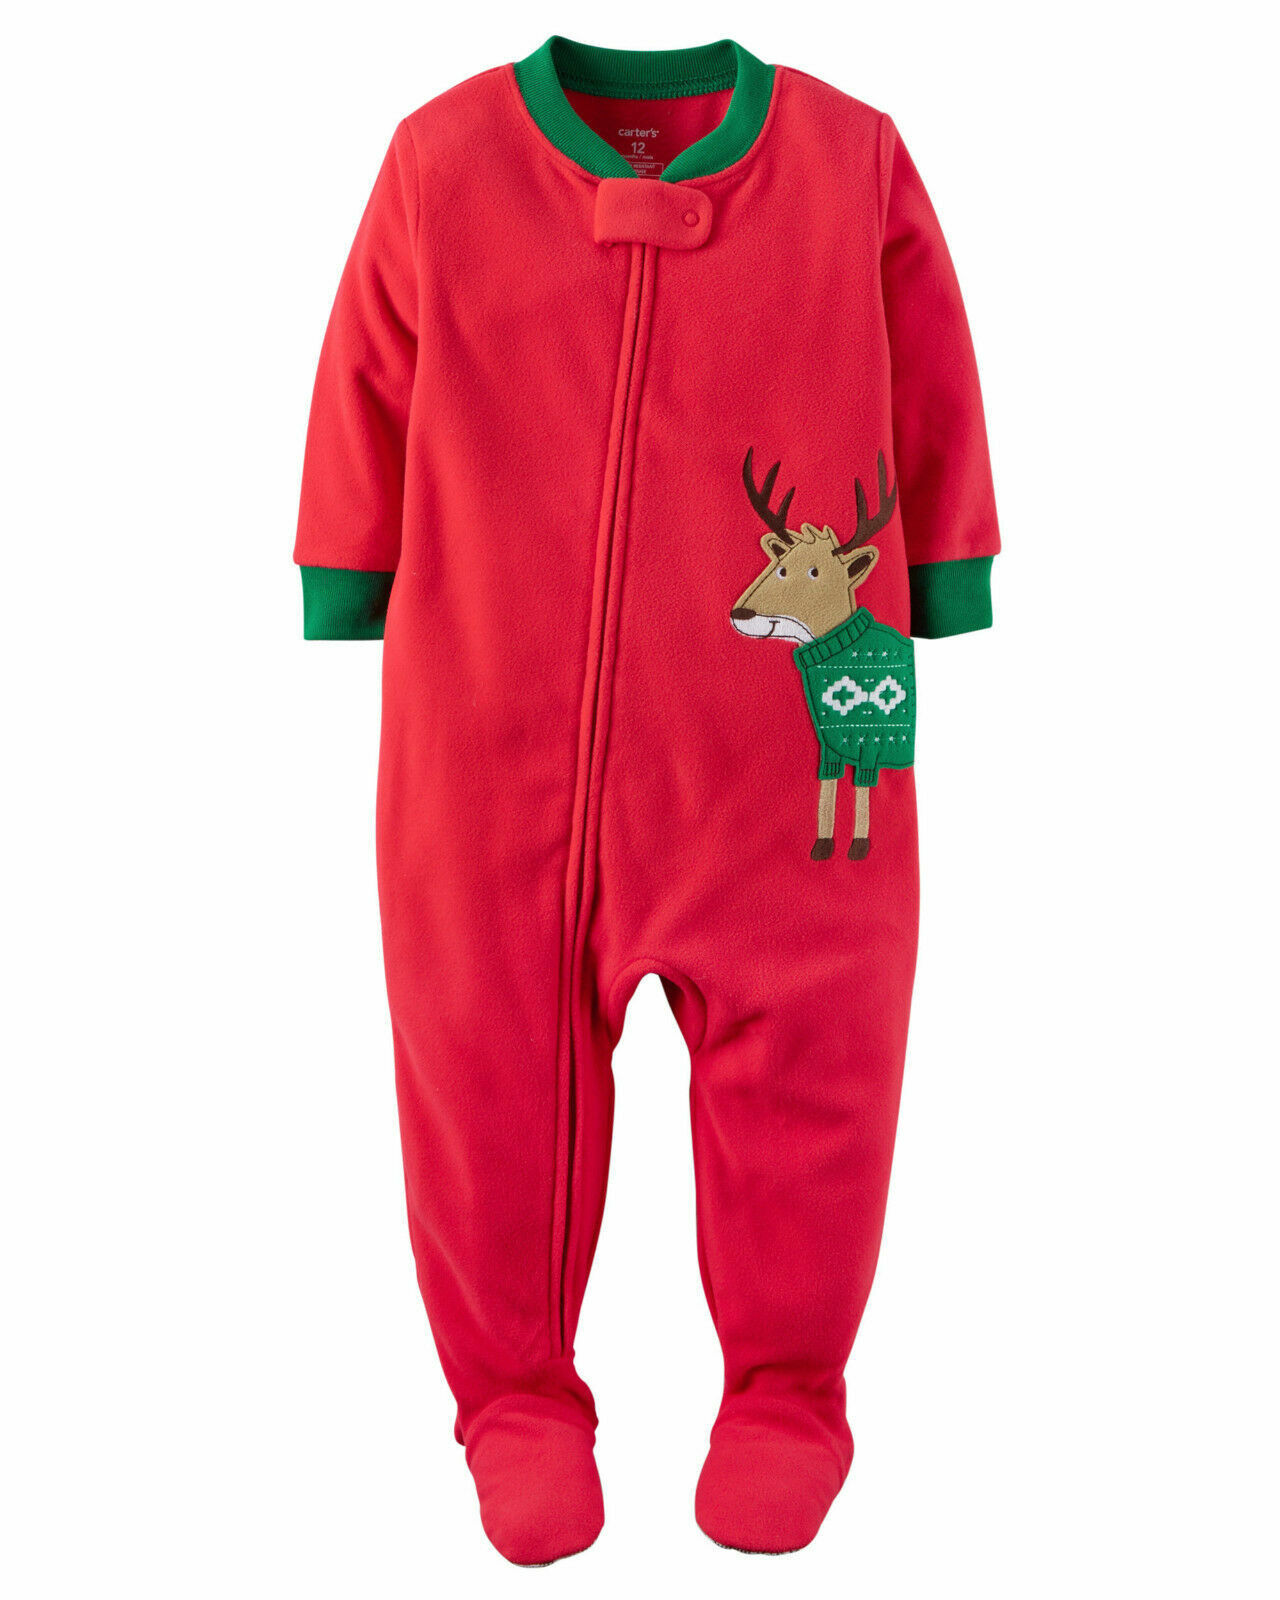 NWT Max 42% OFF ☀FOOTED FLEECE☀ CARTER'S Boys specialty shop CHRISTMAS REINDEER Pajama New